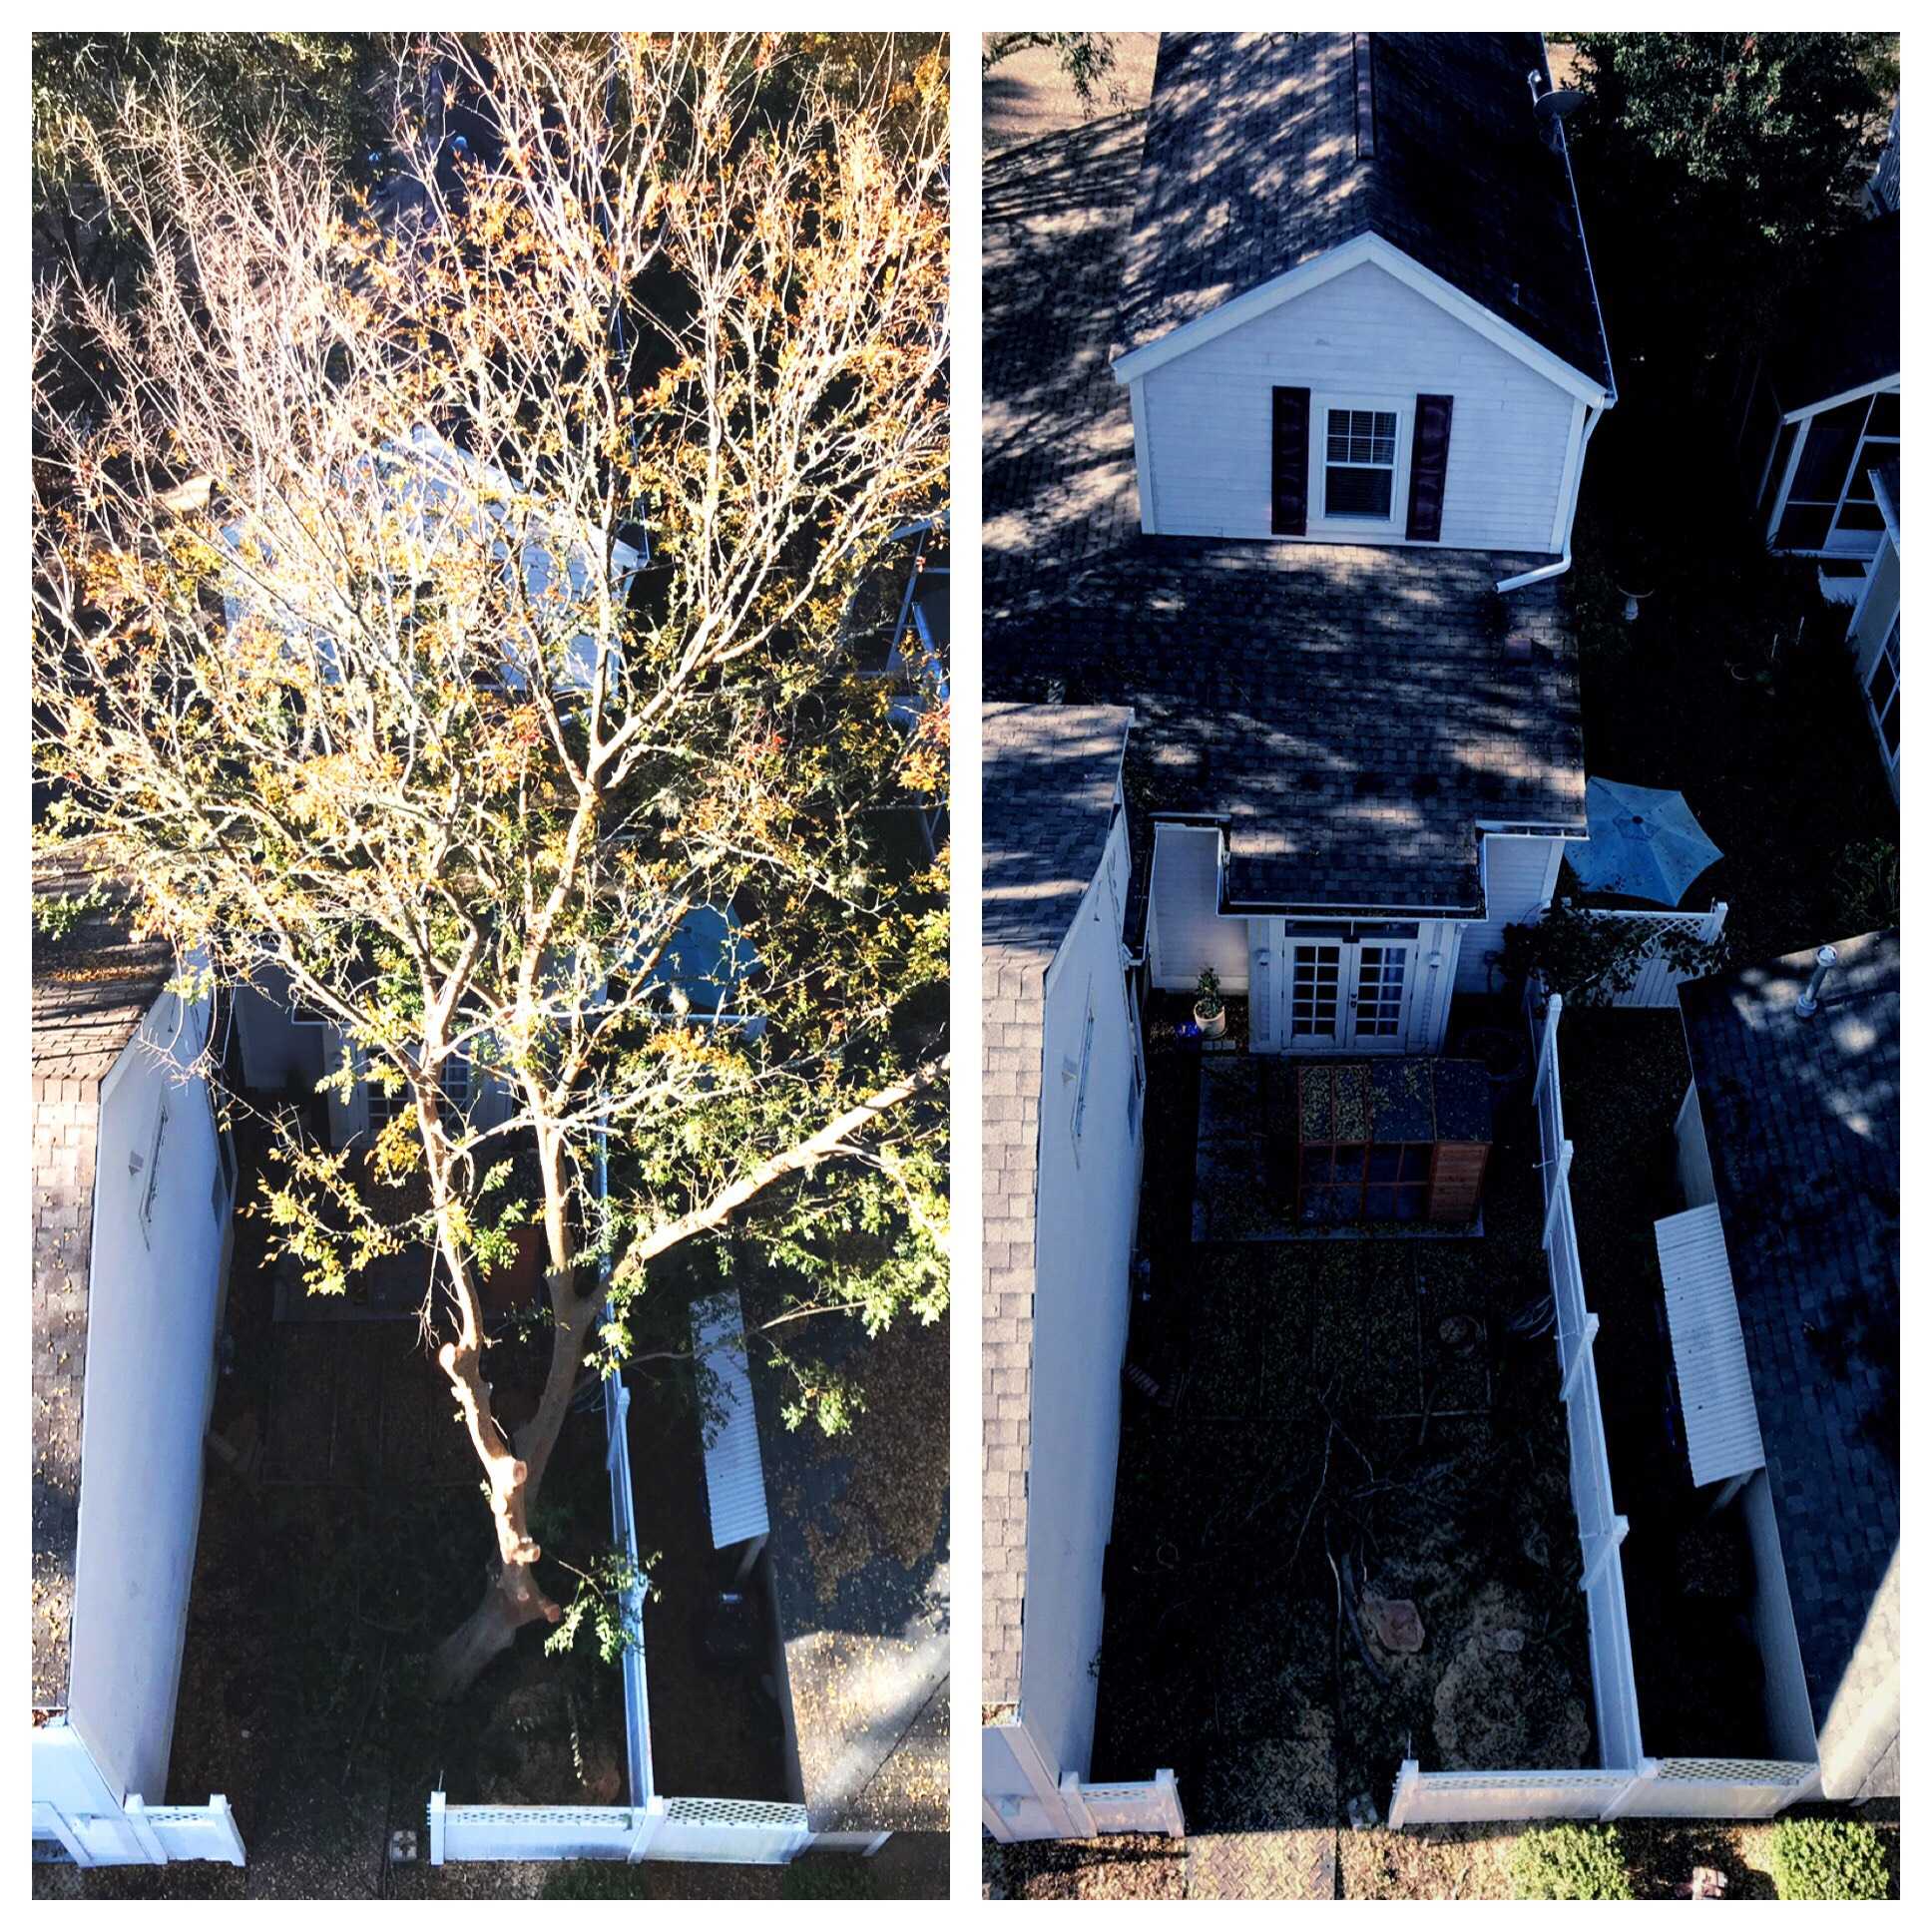 A before and after shot of a tree standing in a narrow backyard, and the backyard after it has been removed.